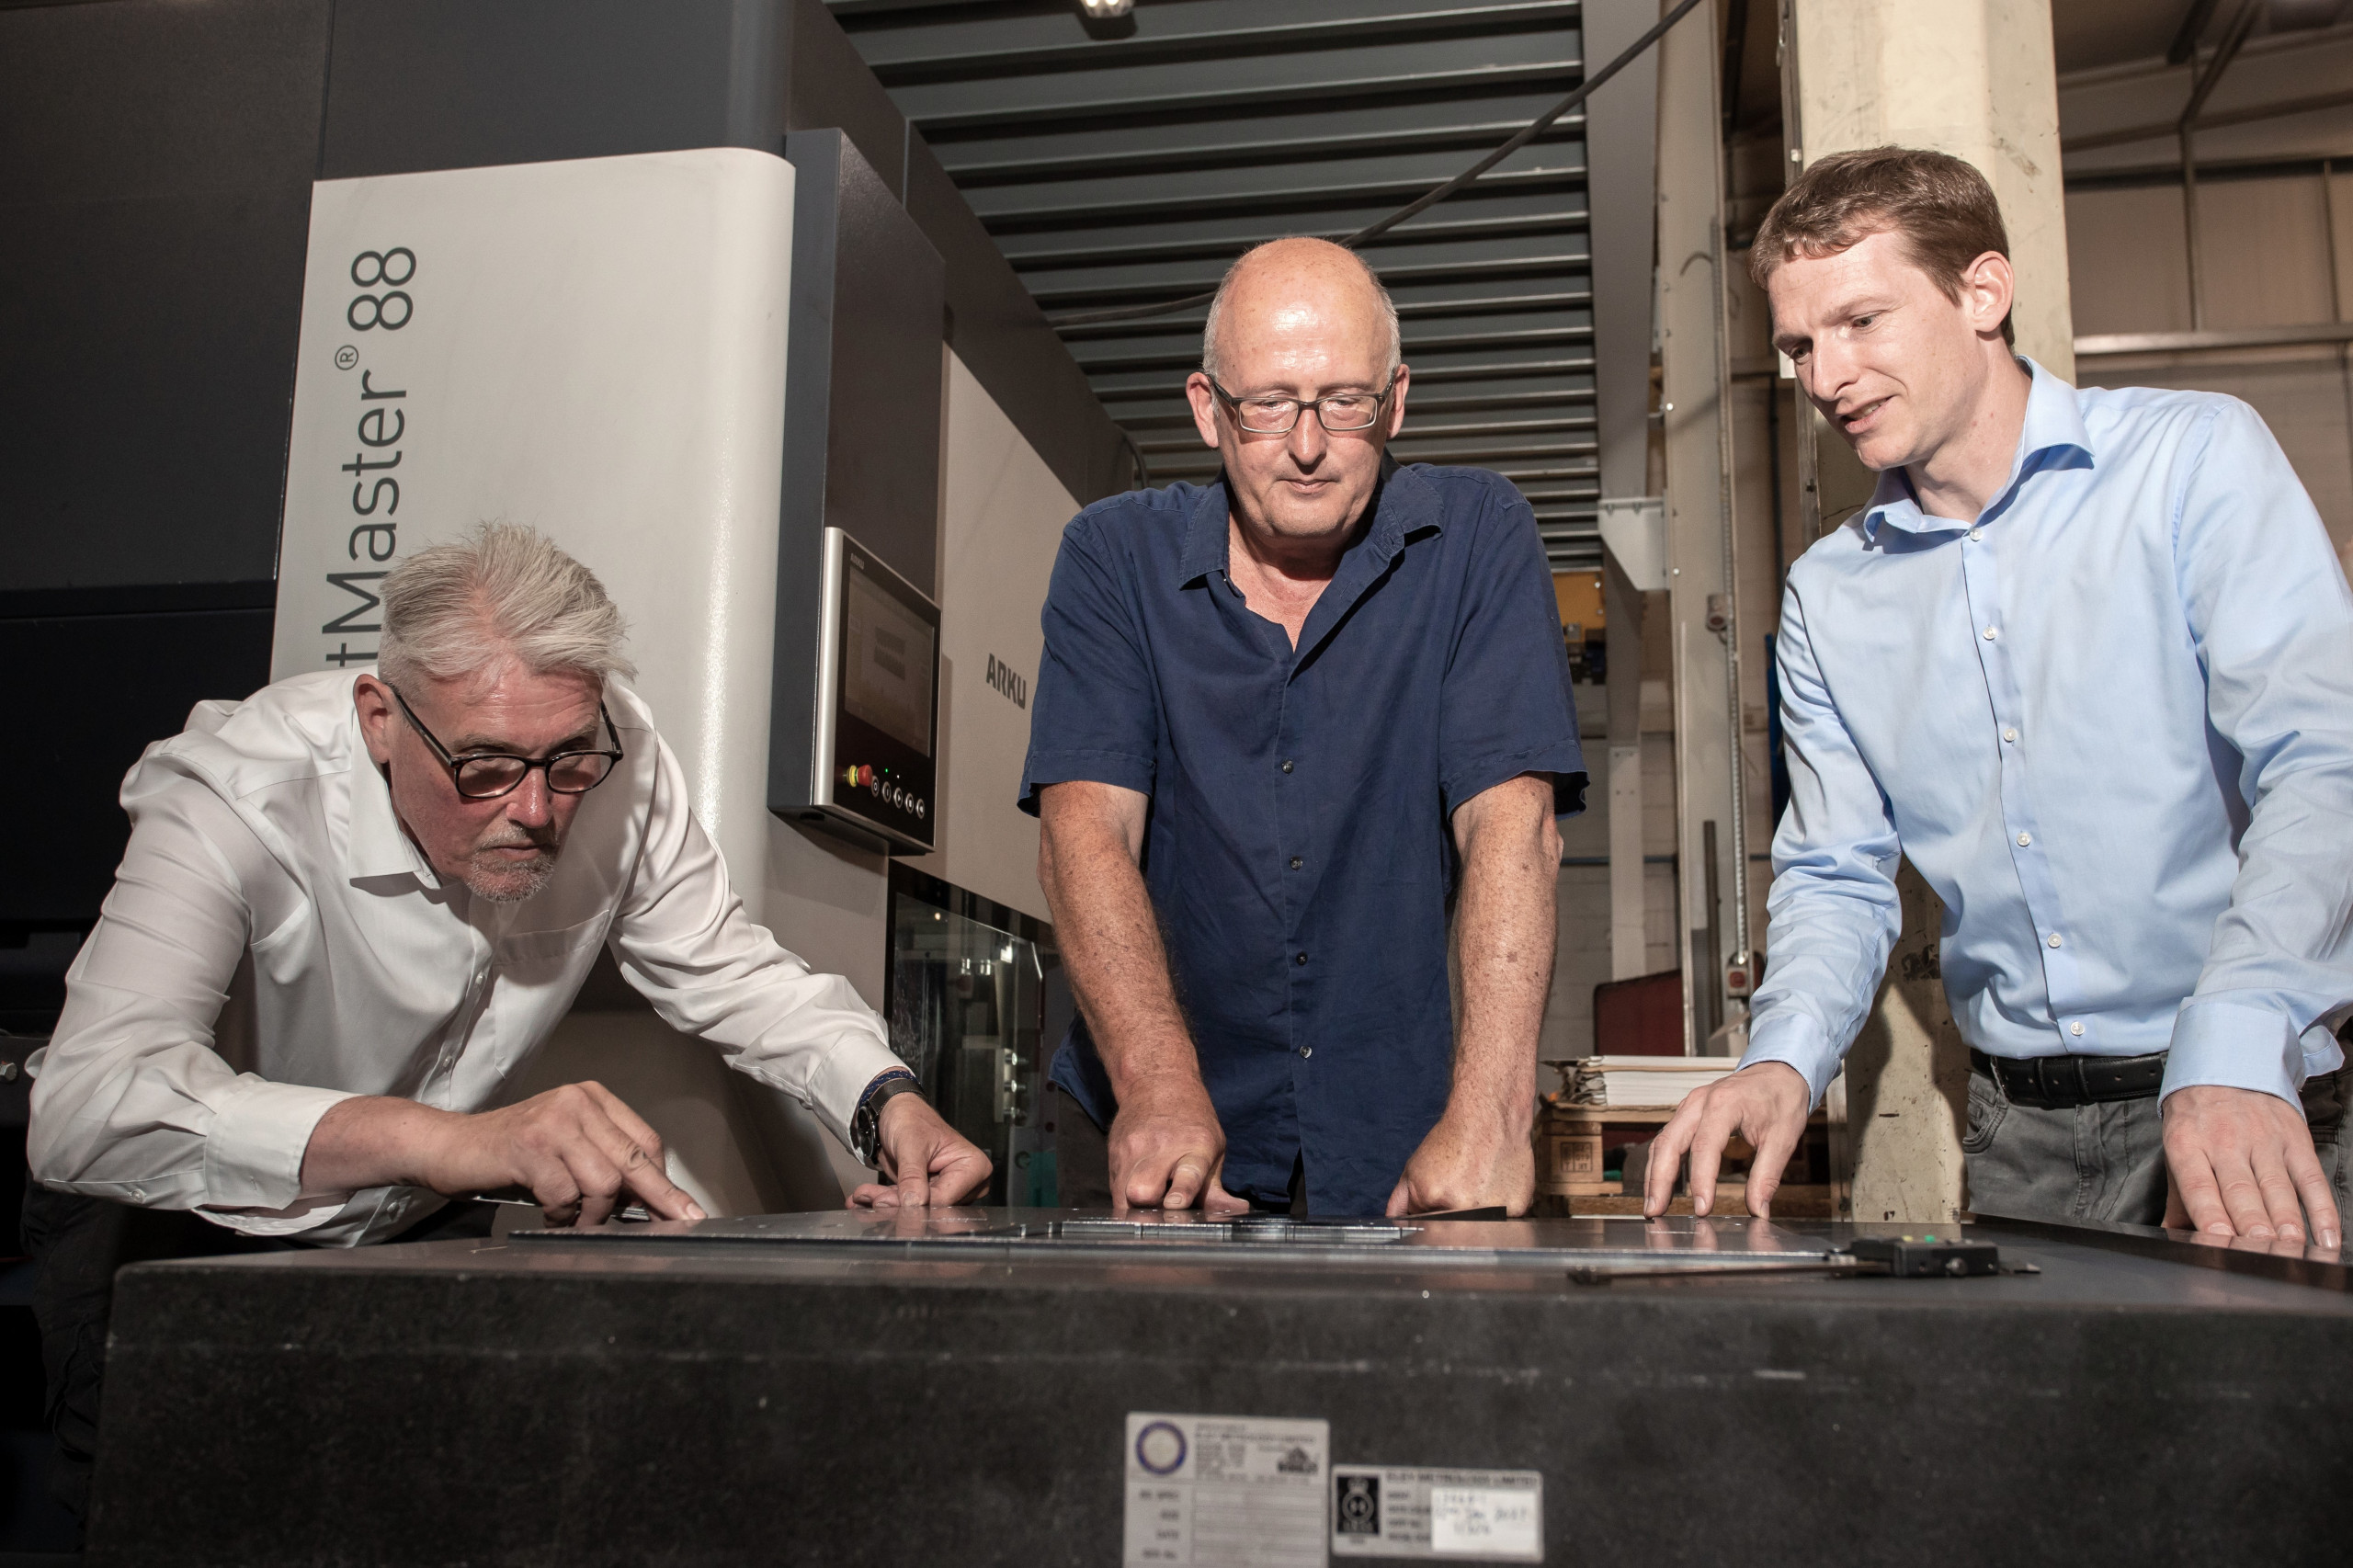 Steve Larkins (left) and Ken Rose (center) from Wrightform agree with Christian Nau from ARKU: The FlatMaster takes straightening at Wrightform to a new level. © Itasse